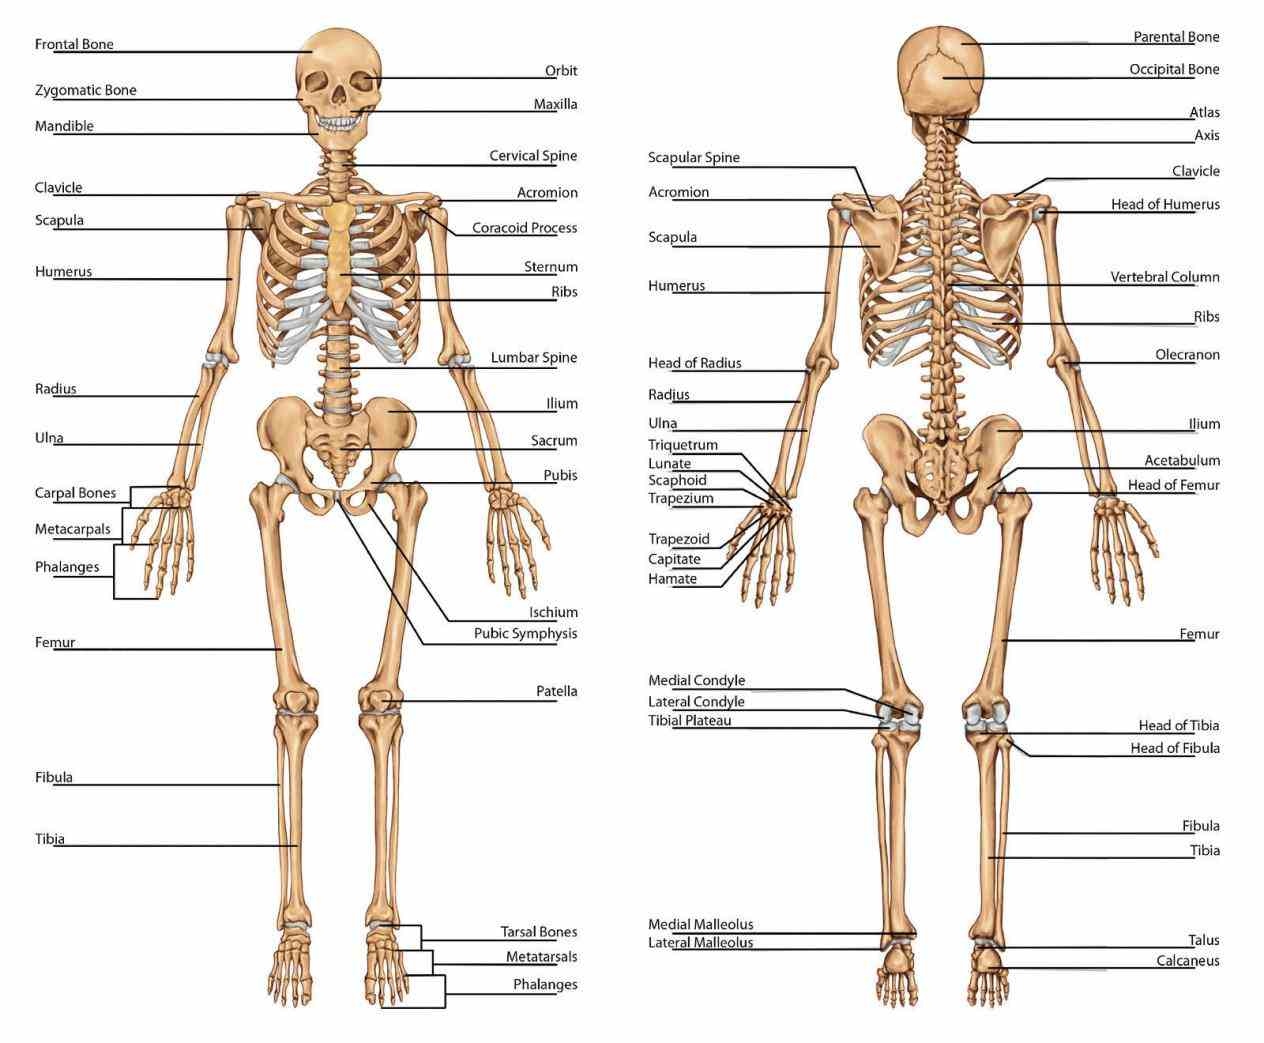 the Anatomy The Skeletal System skeletal system – extensive anatomy images and detailed descriptions allow in an adult